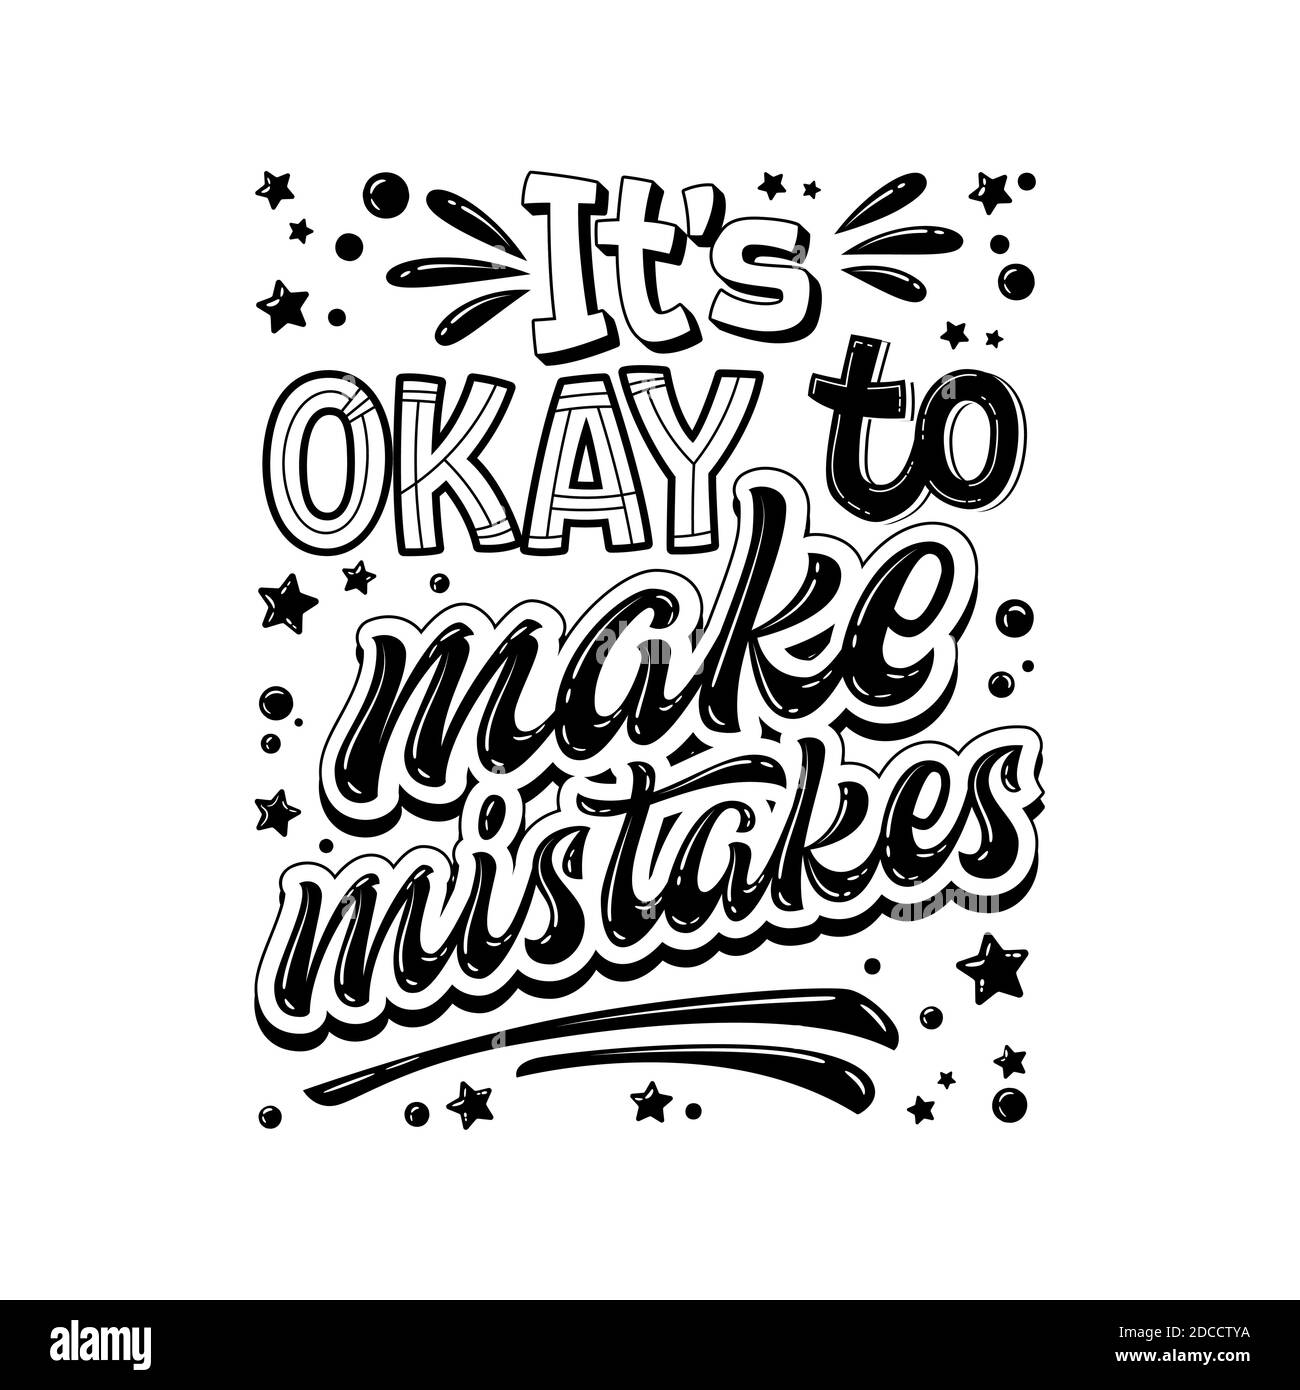 It's OKAY to make mistakes - hand drawn lettering phrase. Black and white mental health support quote. Stock Vector